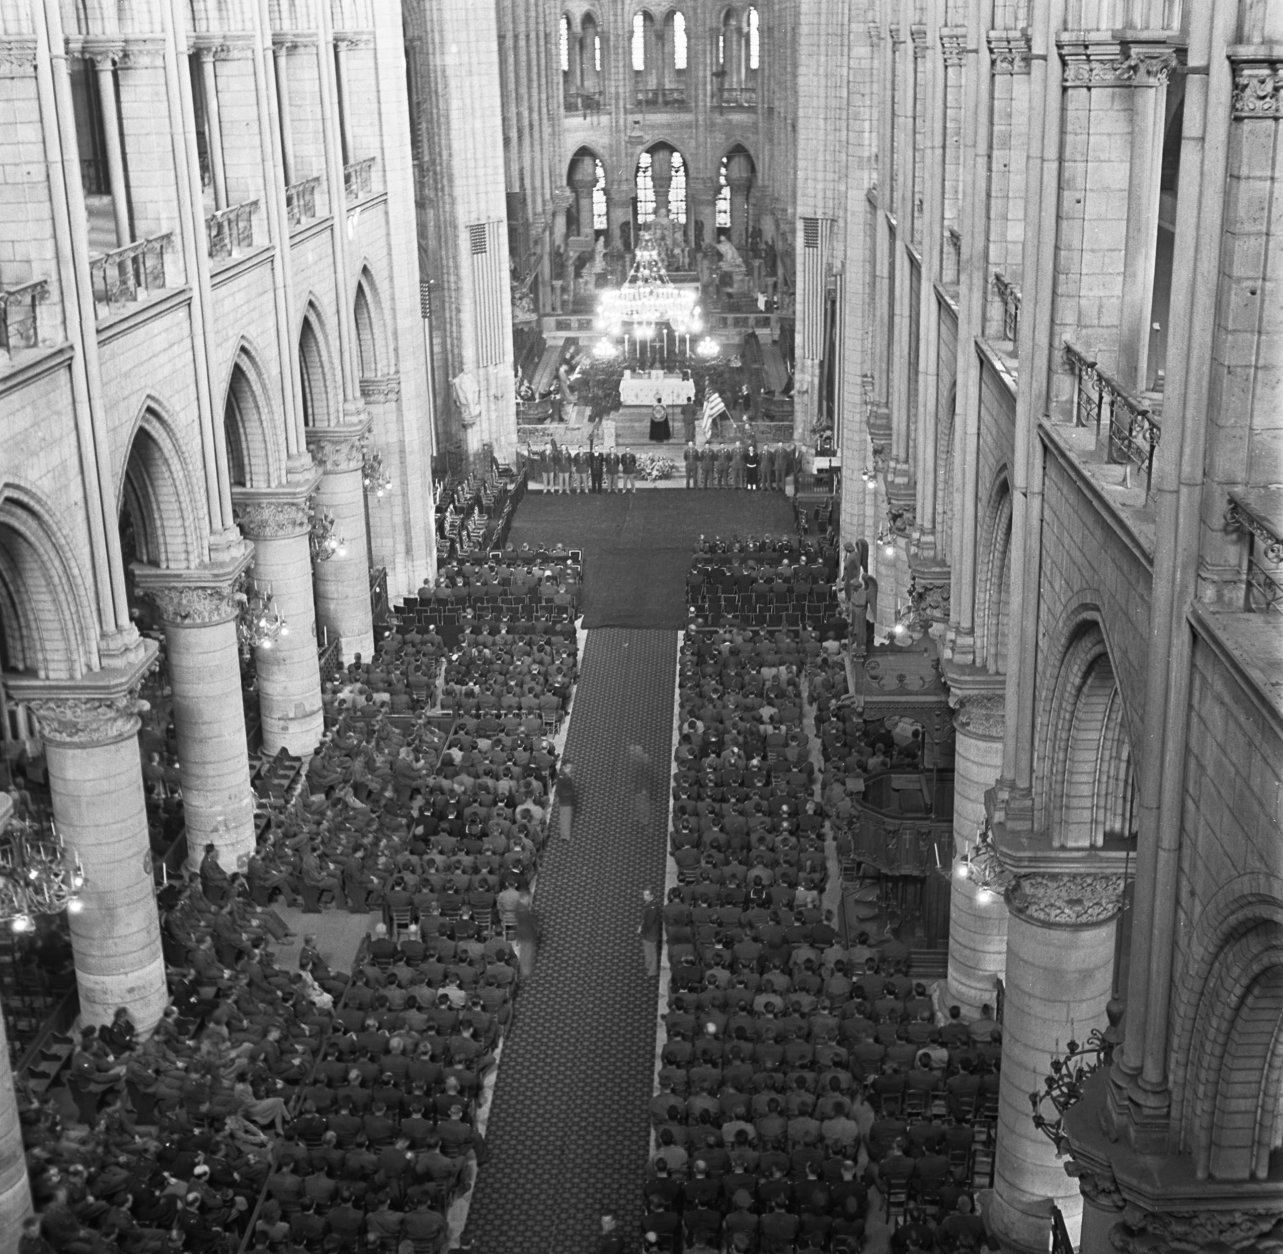 U.S. soldiers fill the pews of Notre Dame Cathedral, Paris, France, April 16, 1945, during the GI memorial service for U.S. President Roosevelt. (AP Photo/Morse)